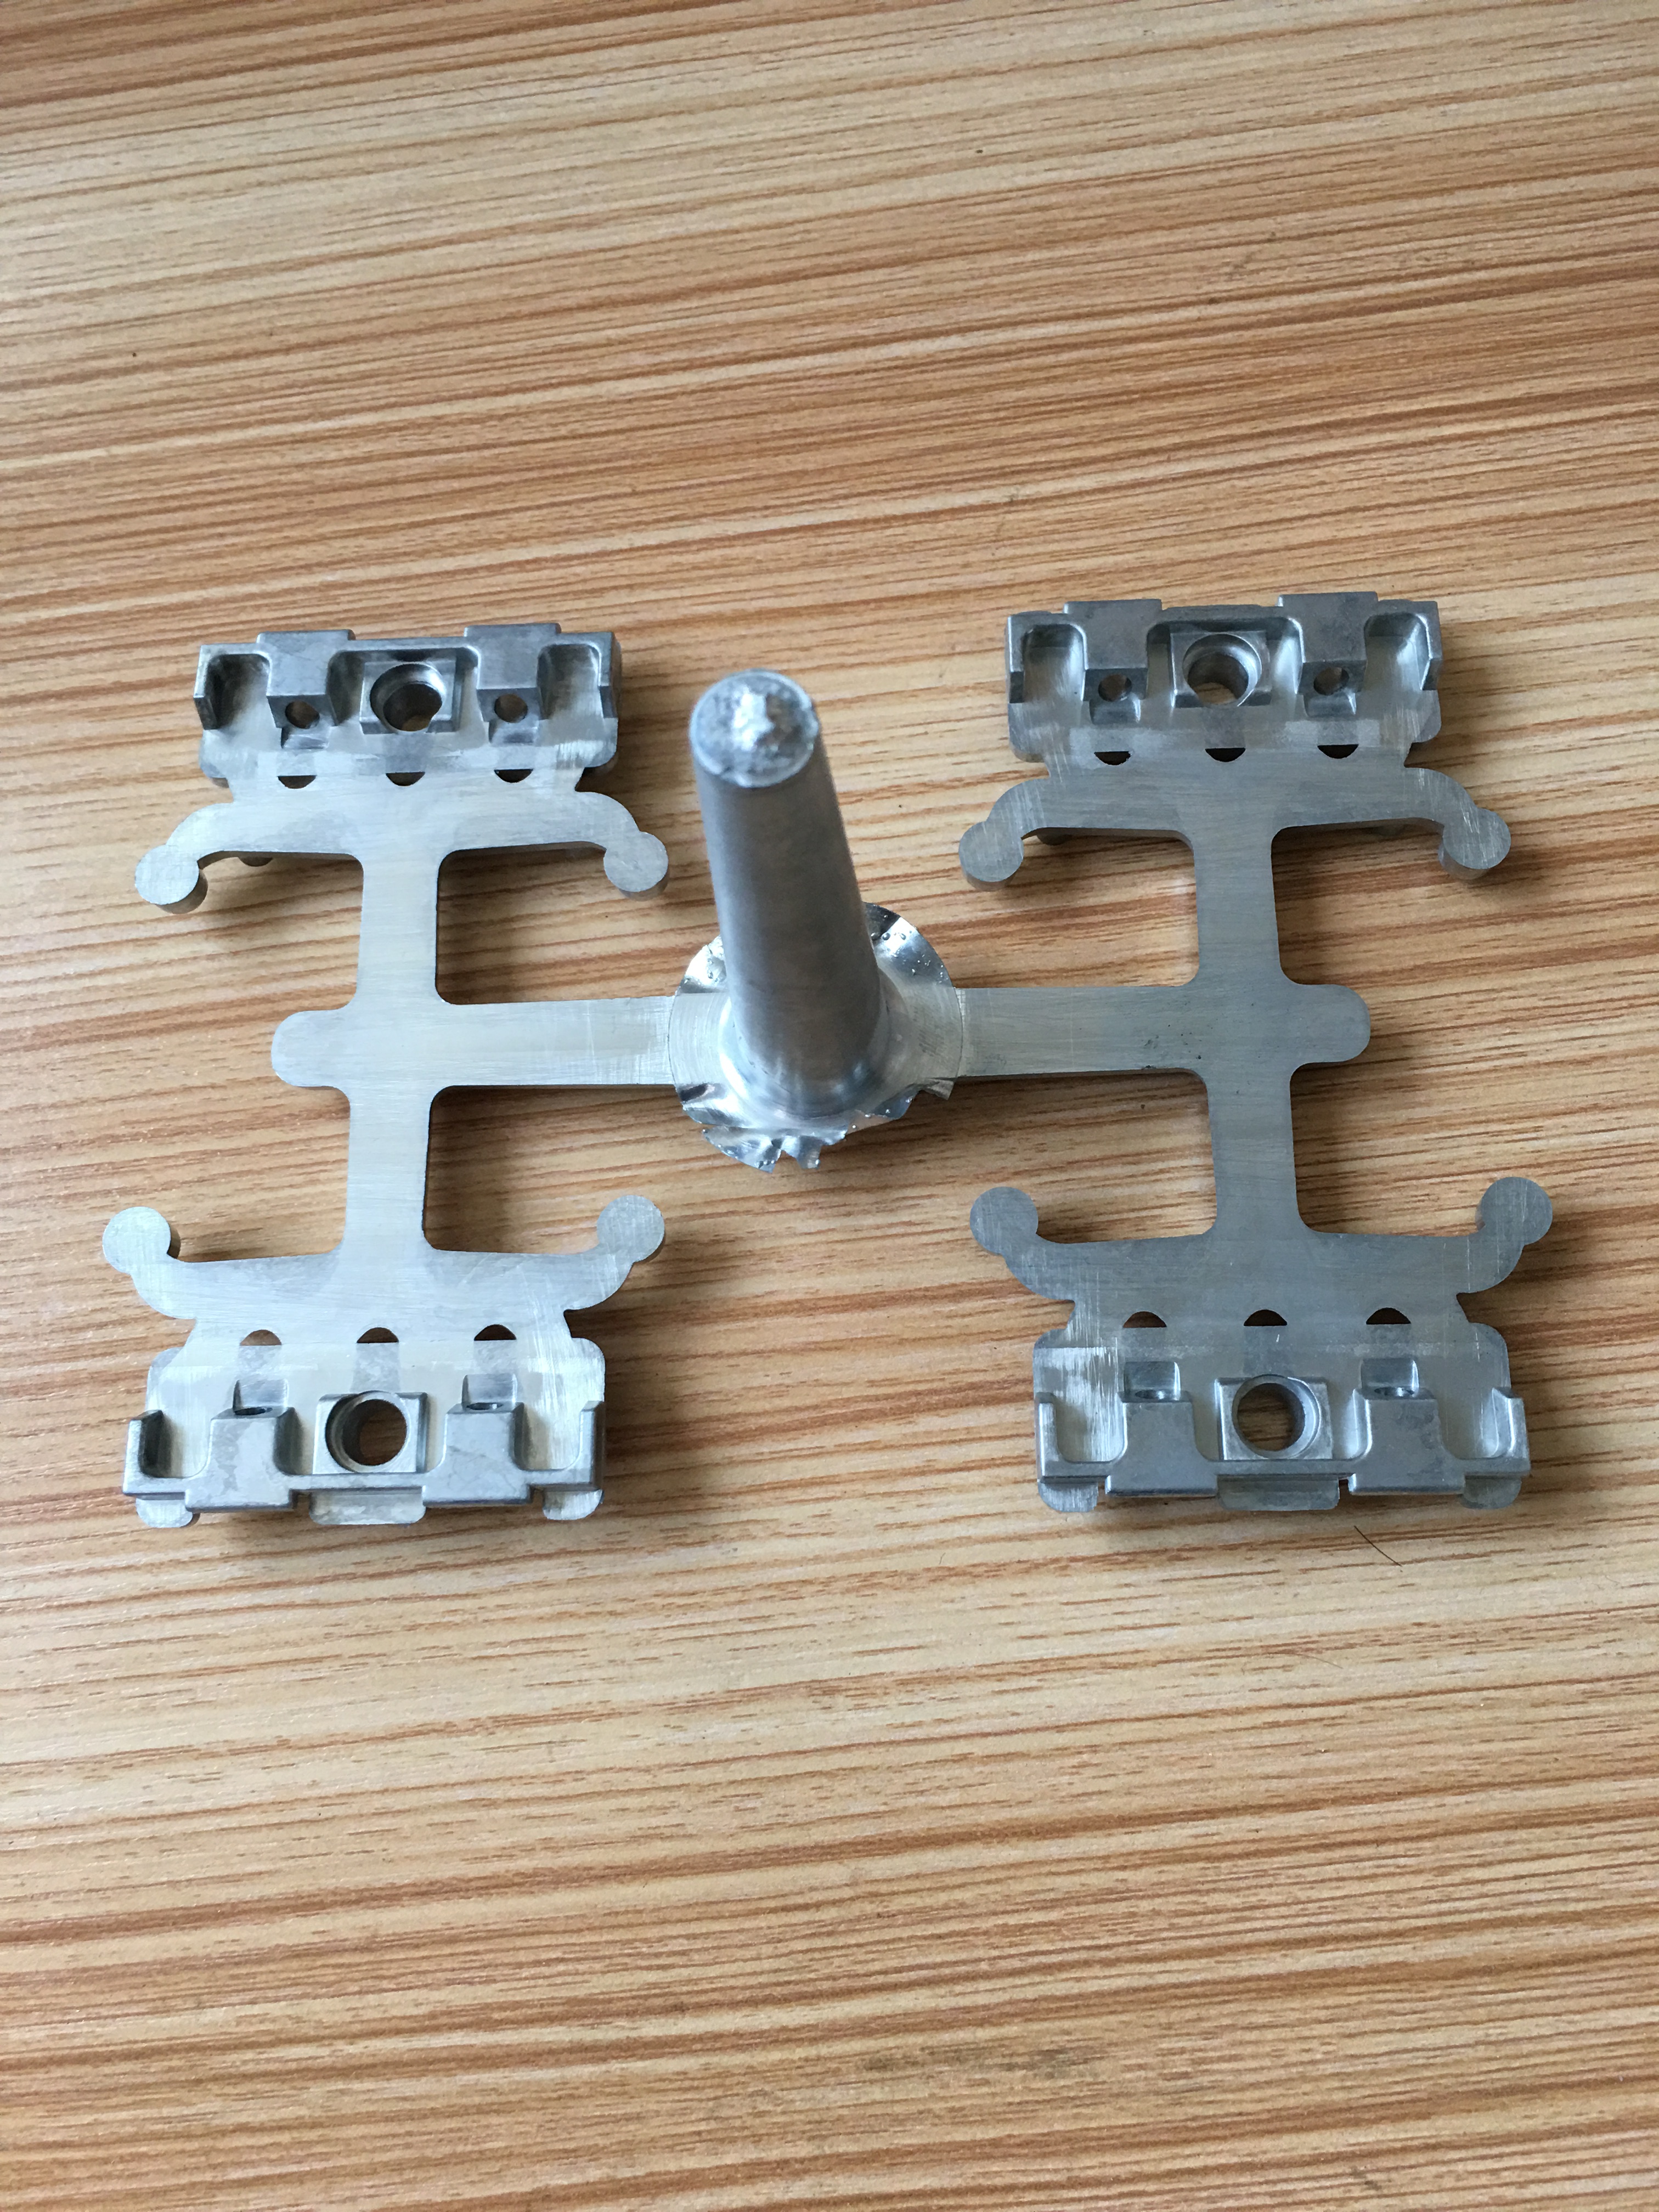 As a china plastic mould factories, can you provide samples before mass production?